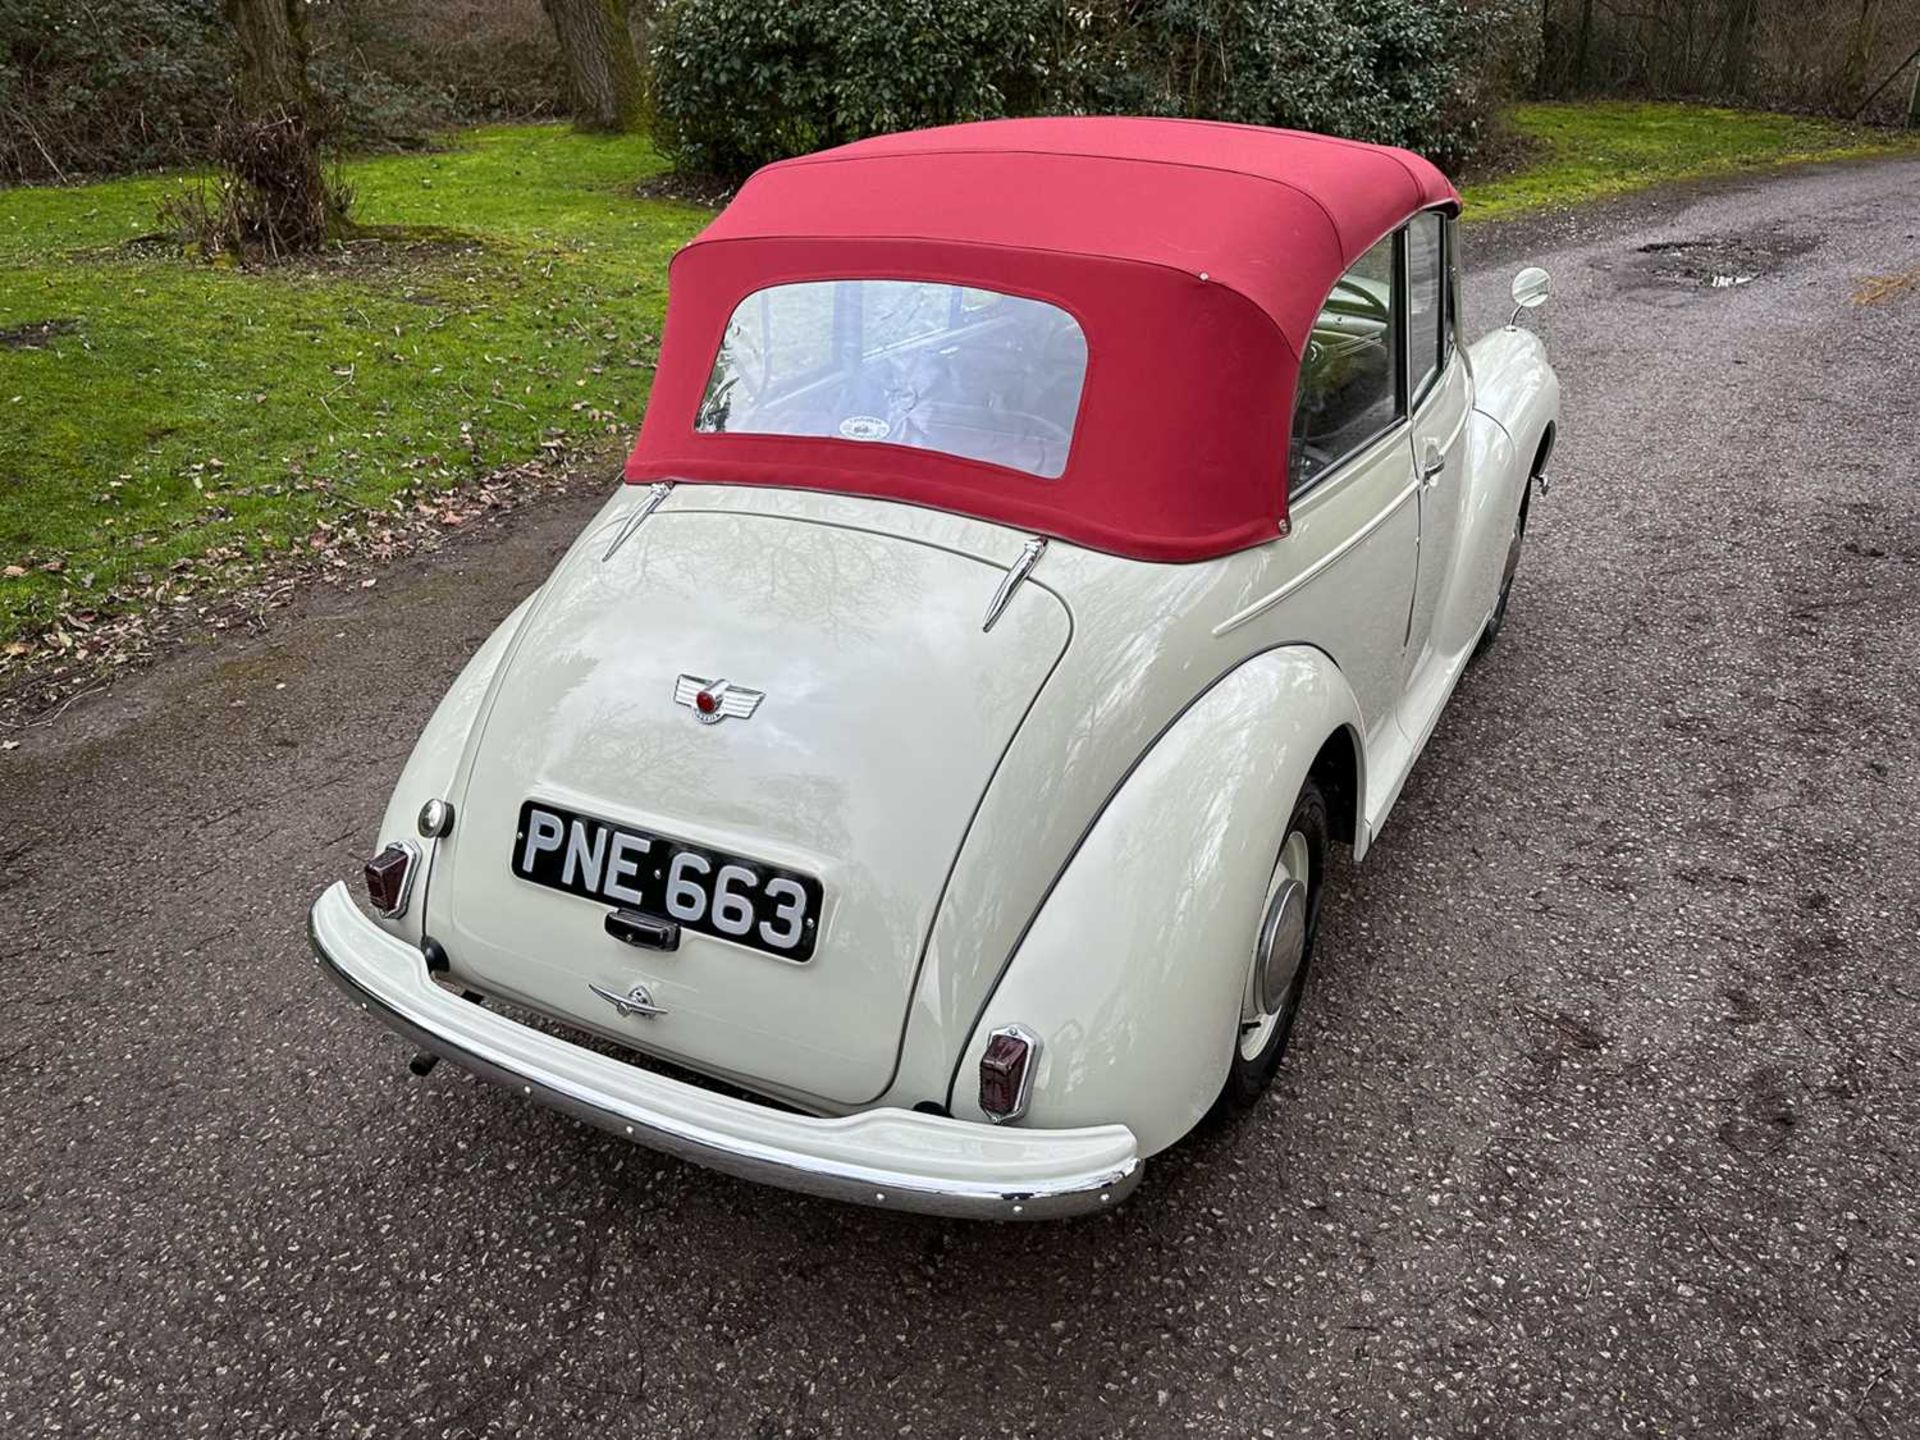 1954 Morris Minor Tourer Fully restored to concours standard - Image 31 of 100